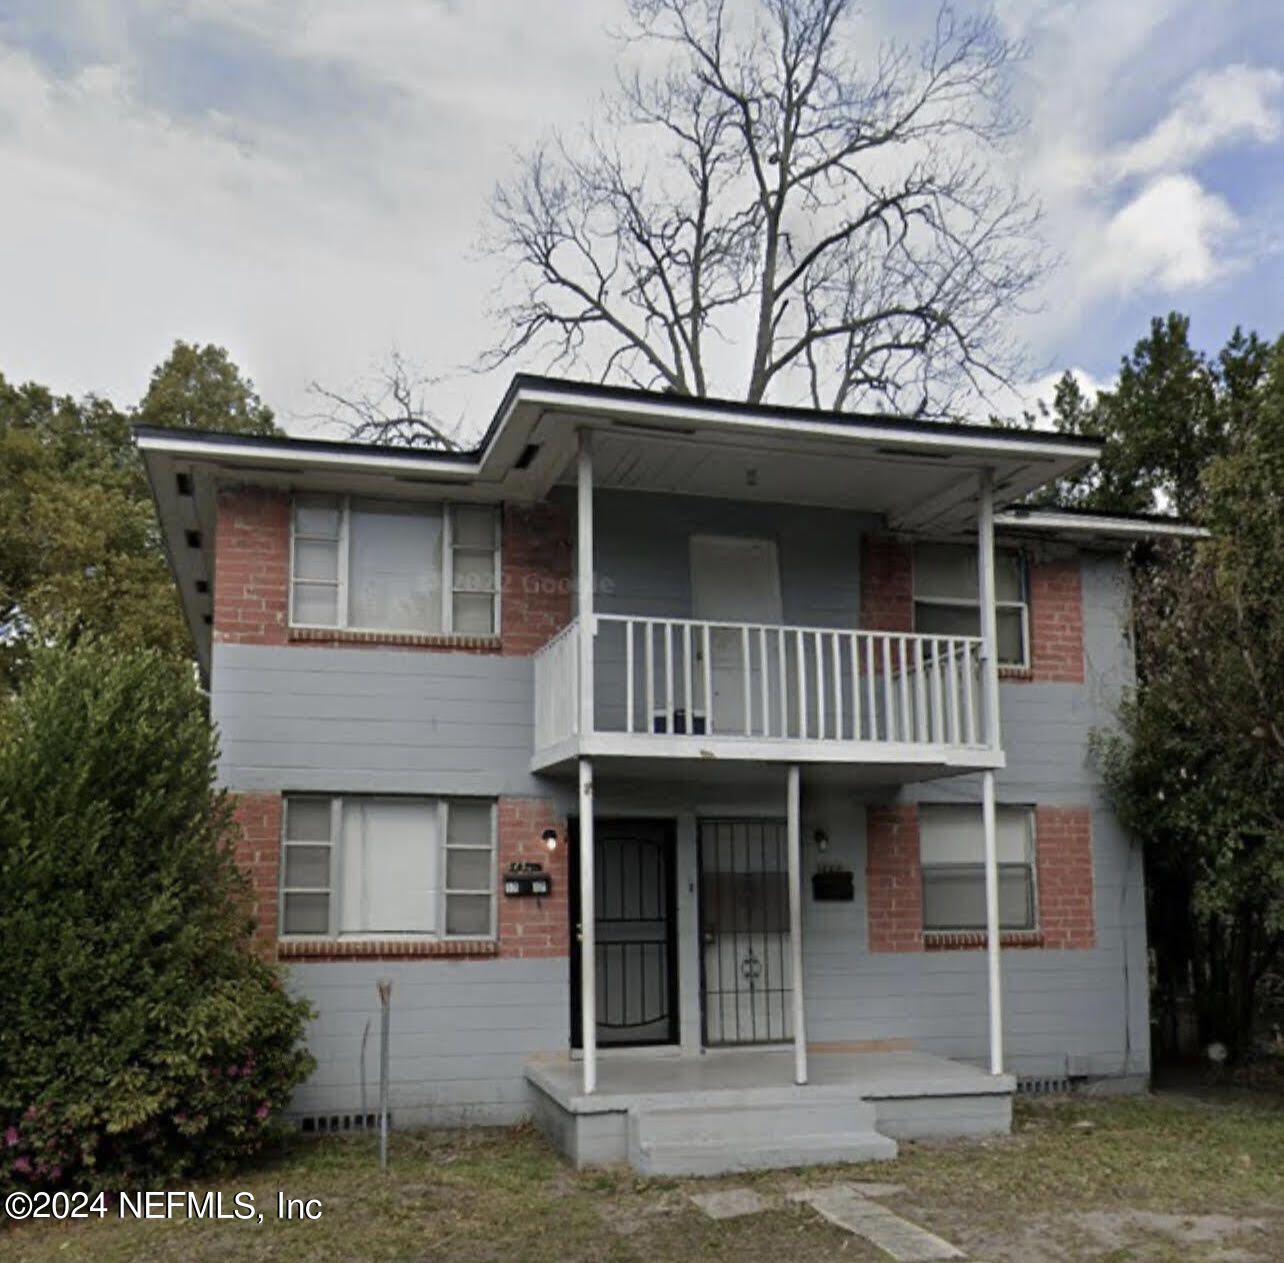 Jacksonville, FL home for sale located at 1717 W 26 Street, Jacksonville, FL 32209